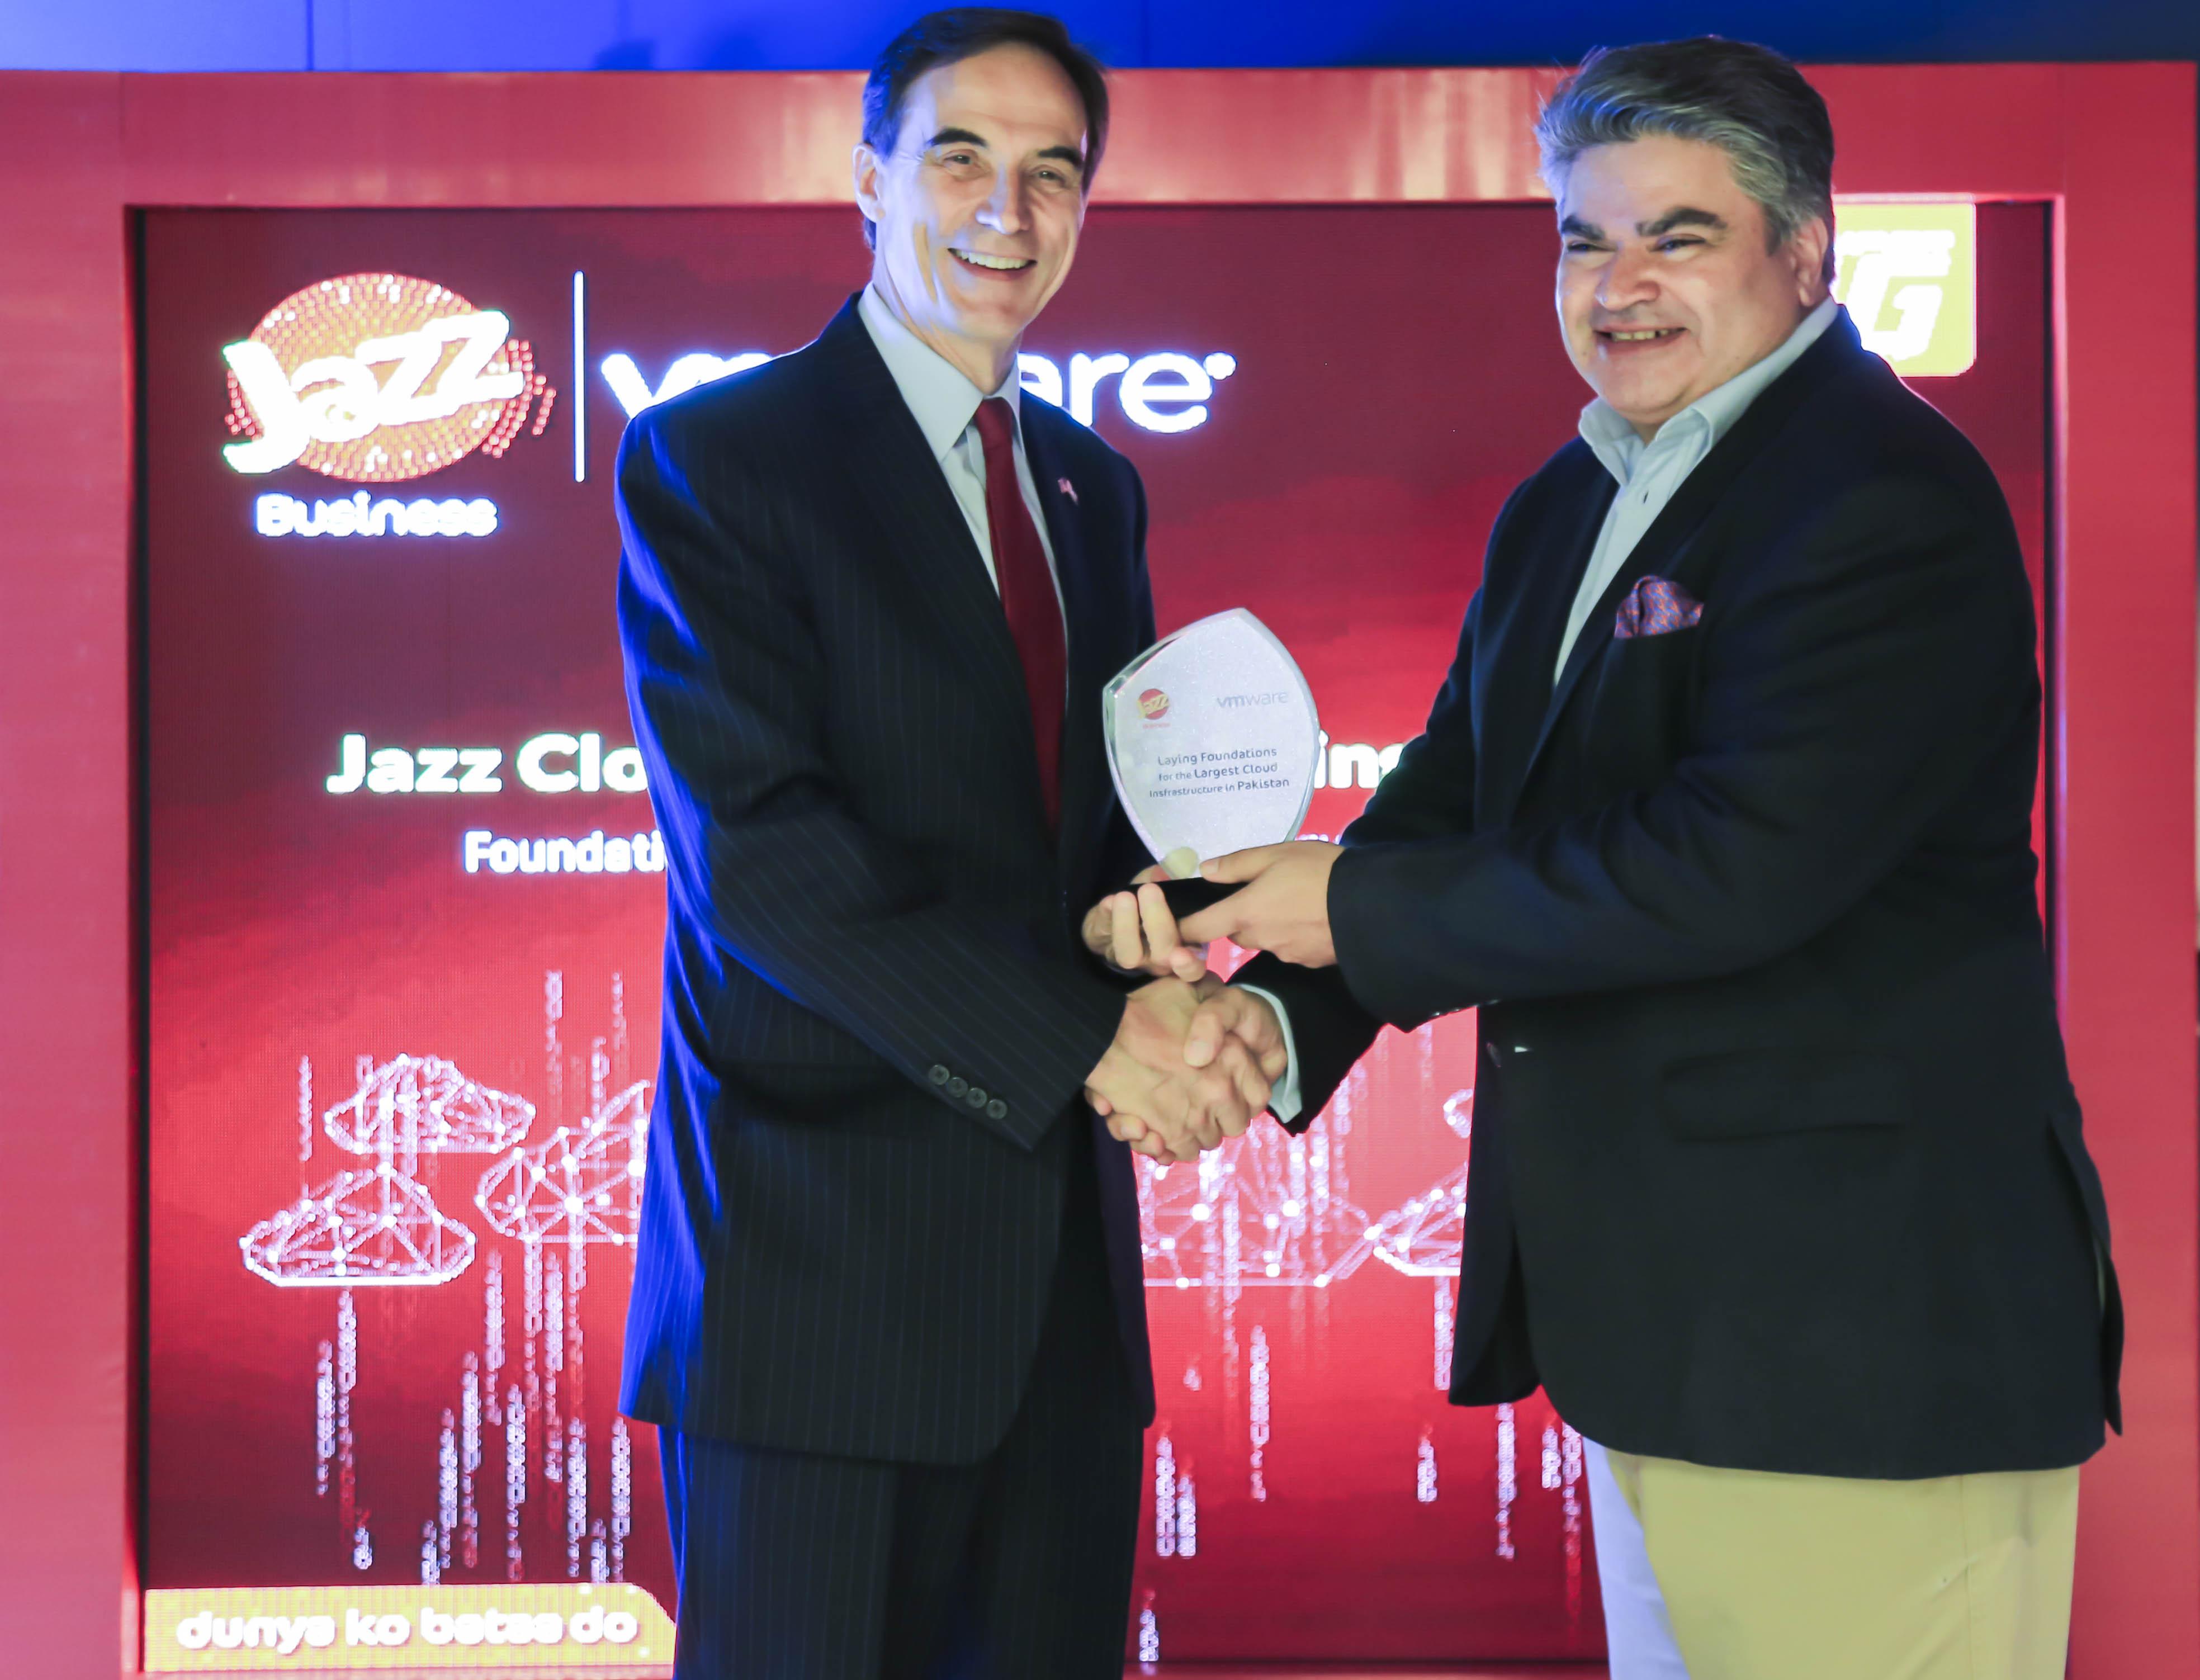 Jazz Business partners with VMware to provide best-in-class cloud services